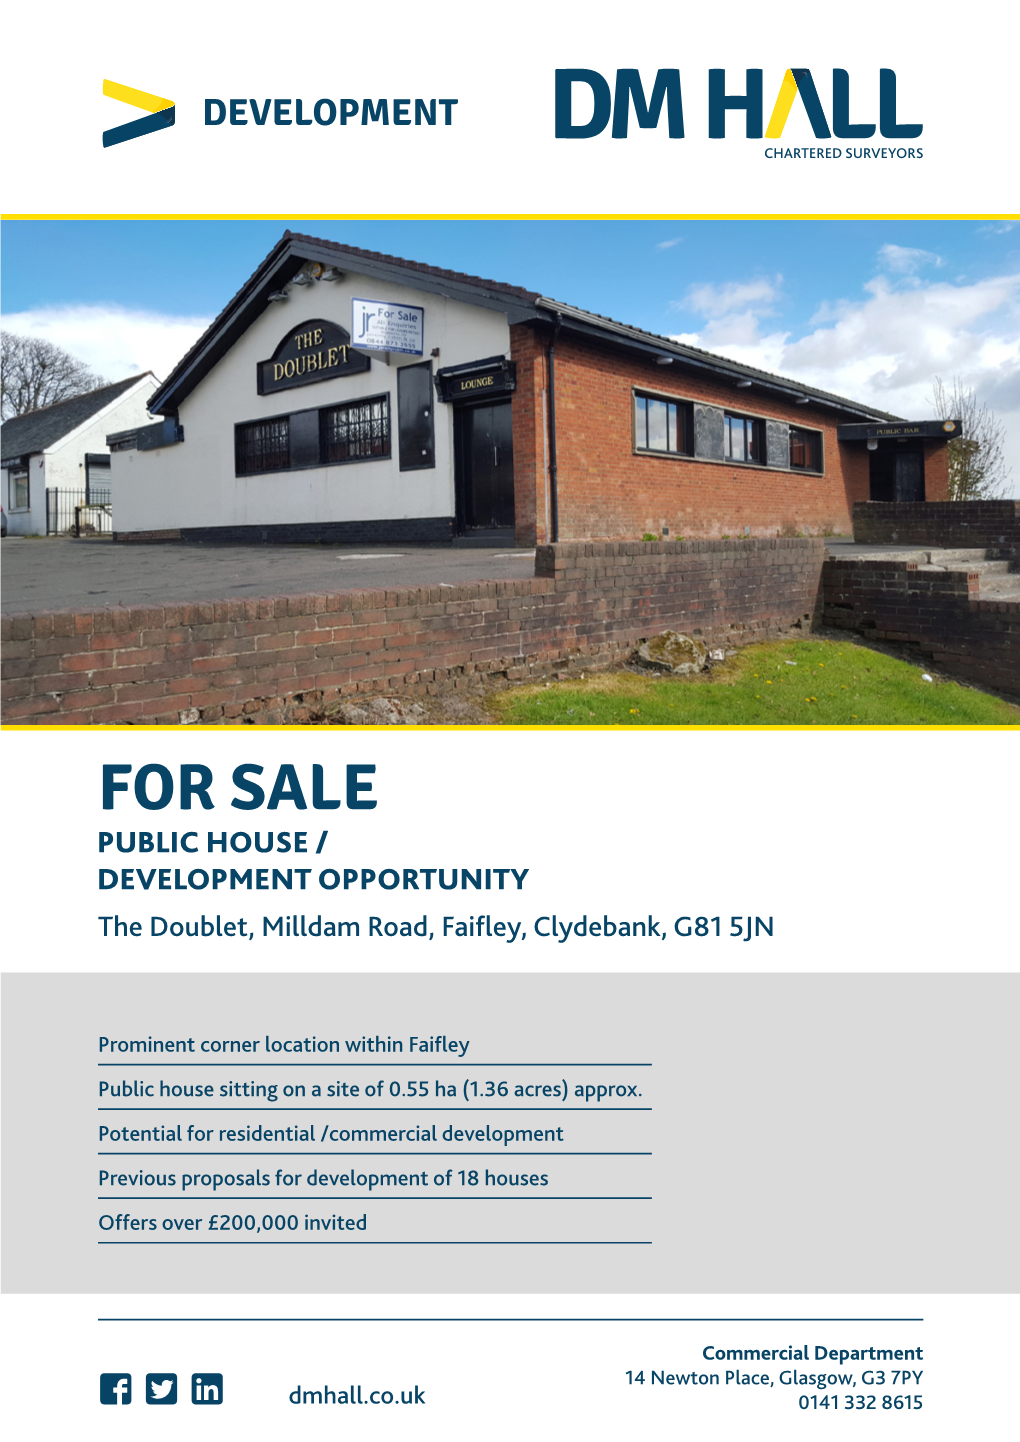 FOR SALE PUBLIC HOUSE / DEVELOPMENT OPPORTUNITY the Doublet, Milldam Road, Faifley, Clydebank, G81 5JN